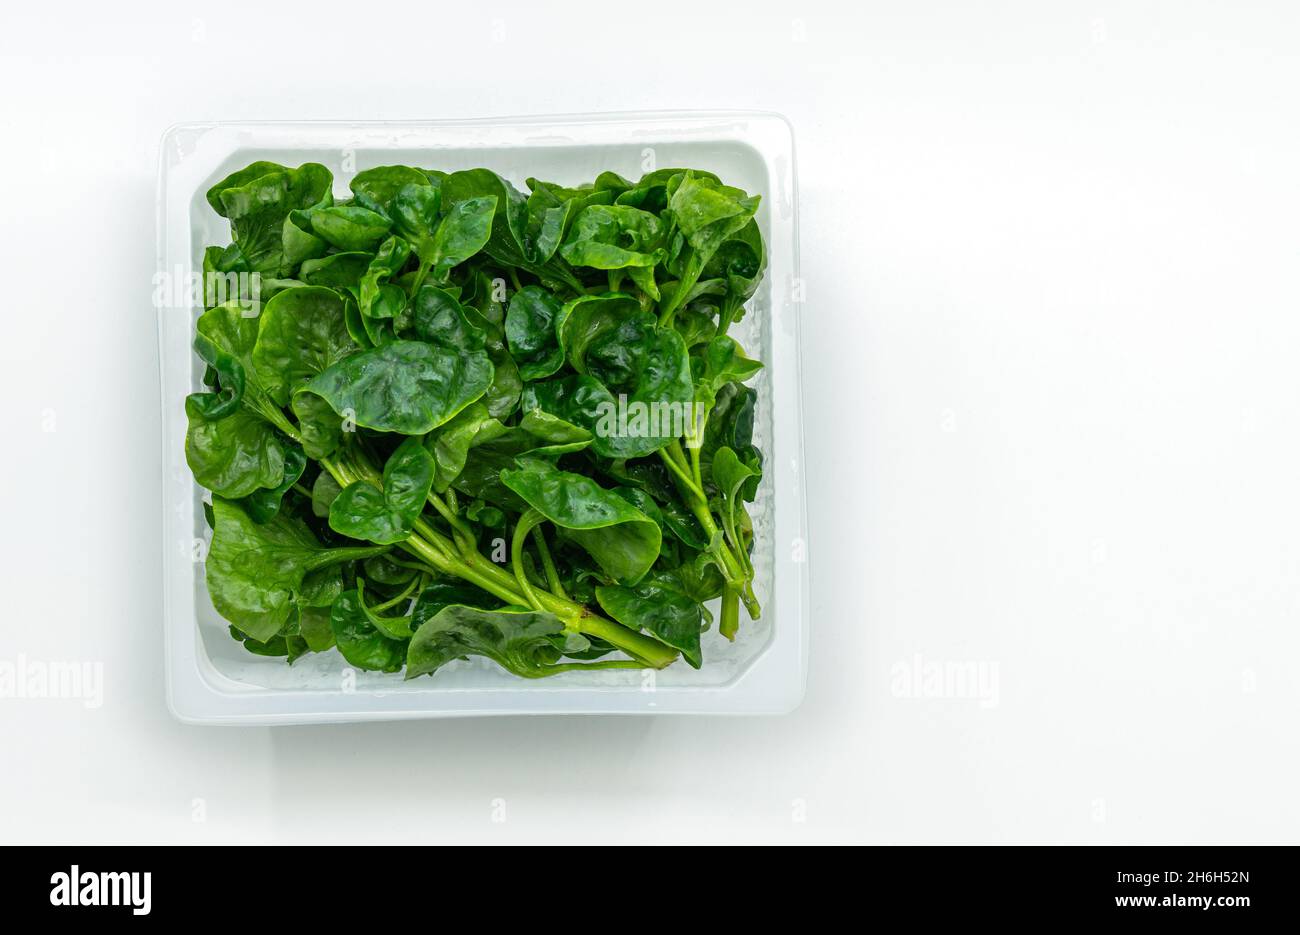 Organic fresh watercress or yellowcress in a square plastic box on white background, top view image, isolated on white background. Stock Photo